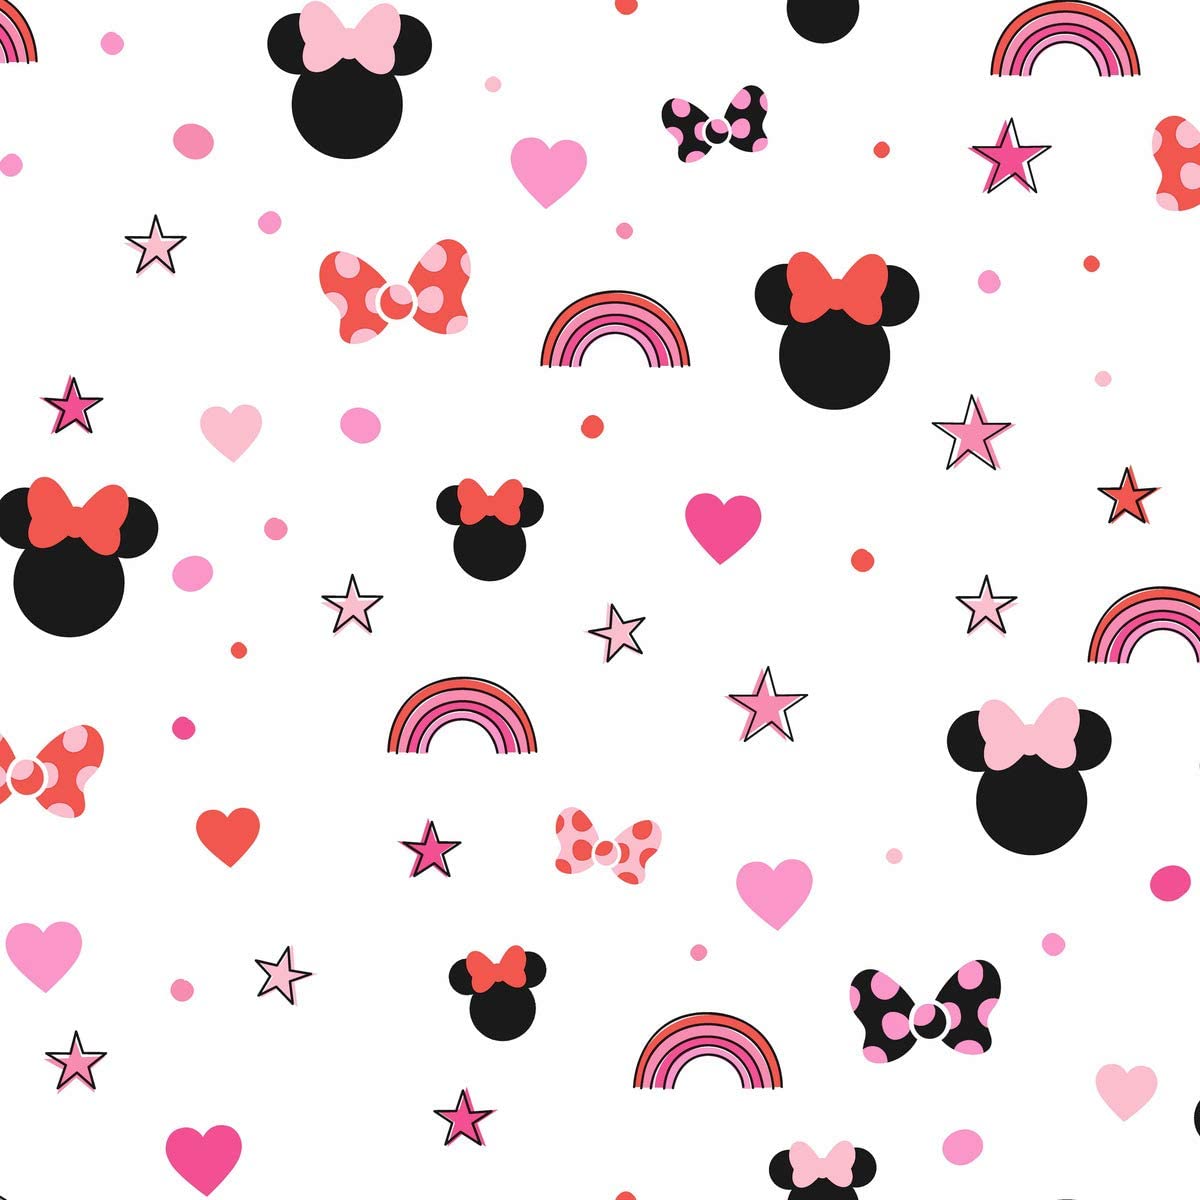 A pattern of minnie mouse and hearts - Minnie Mouse